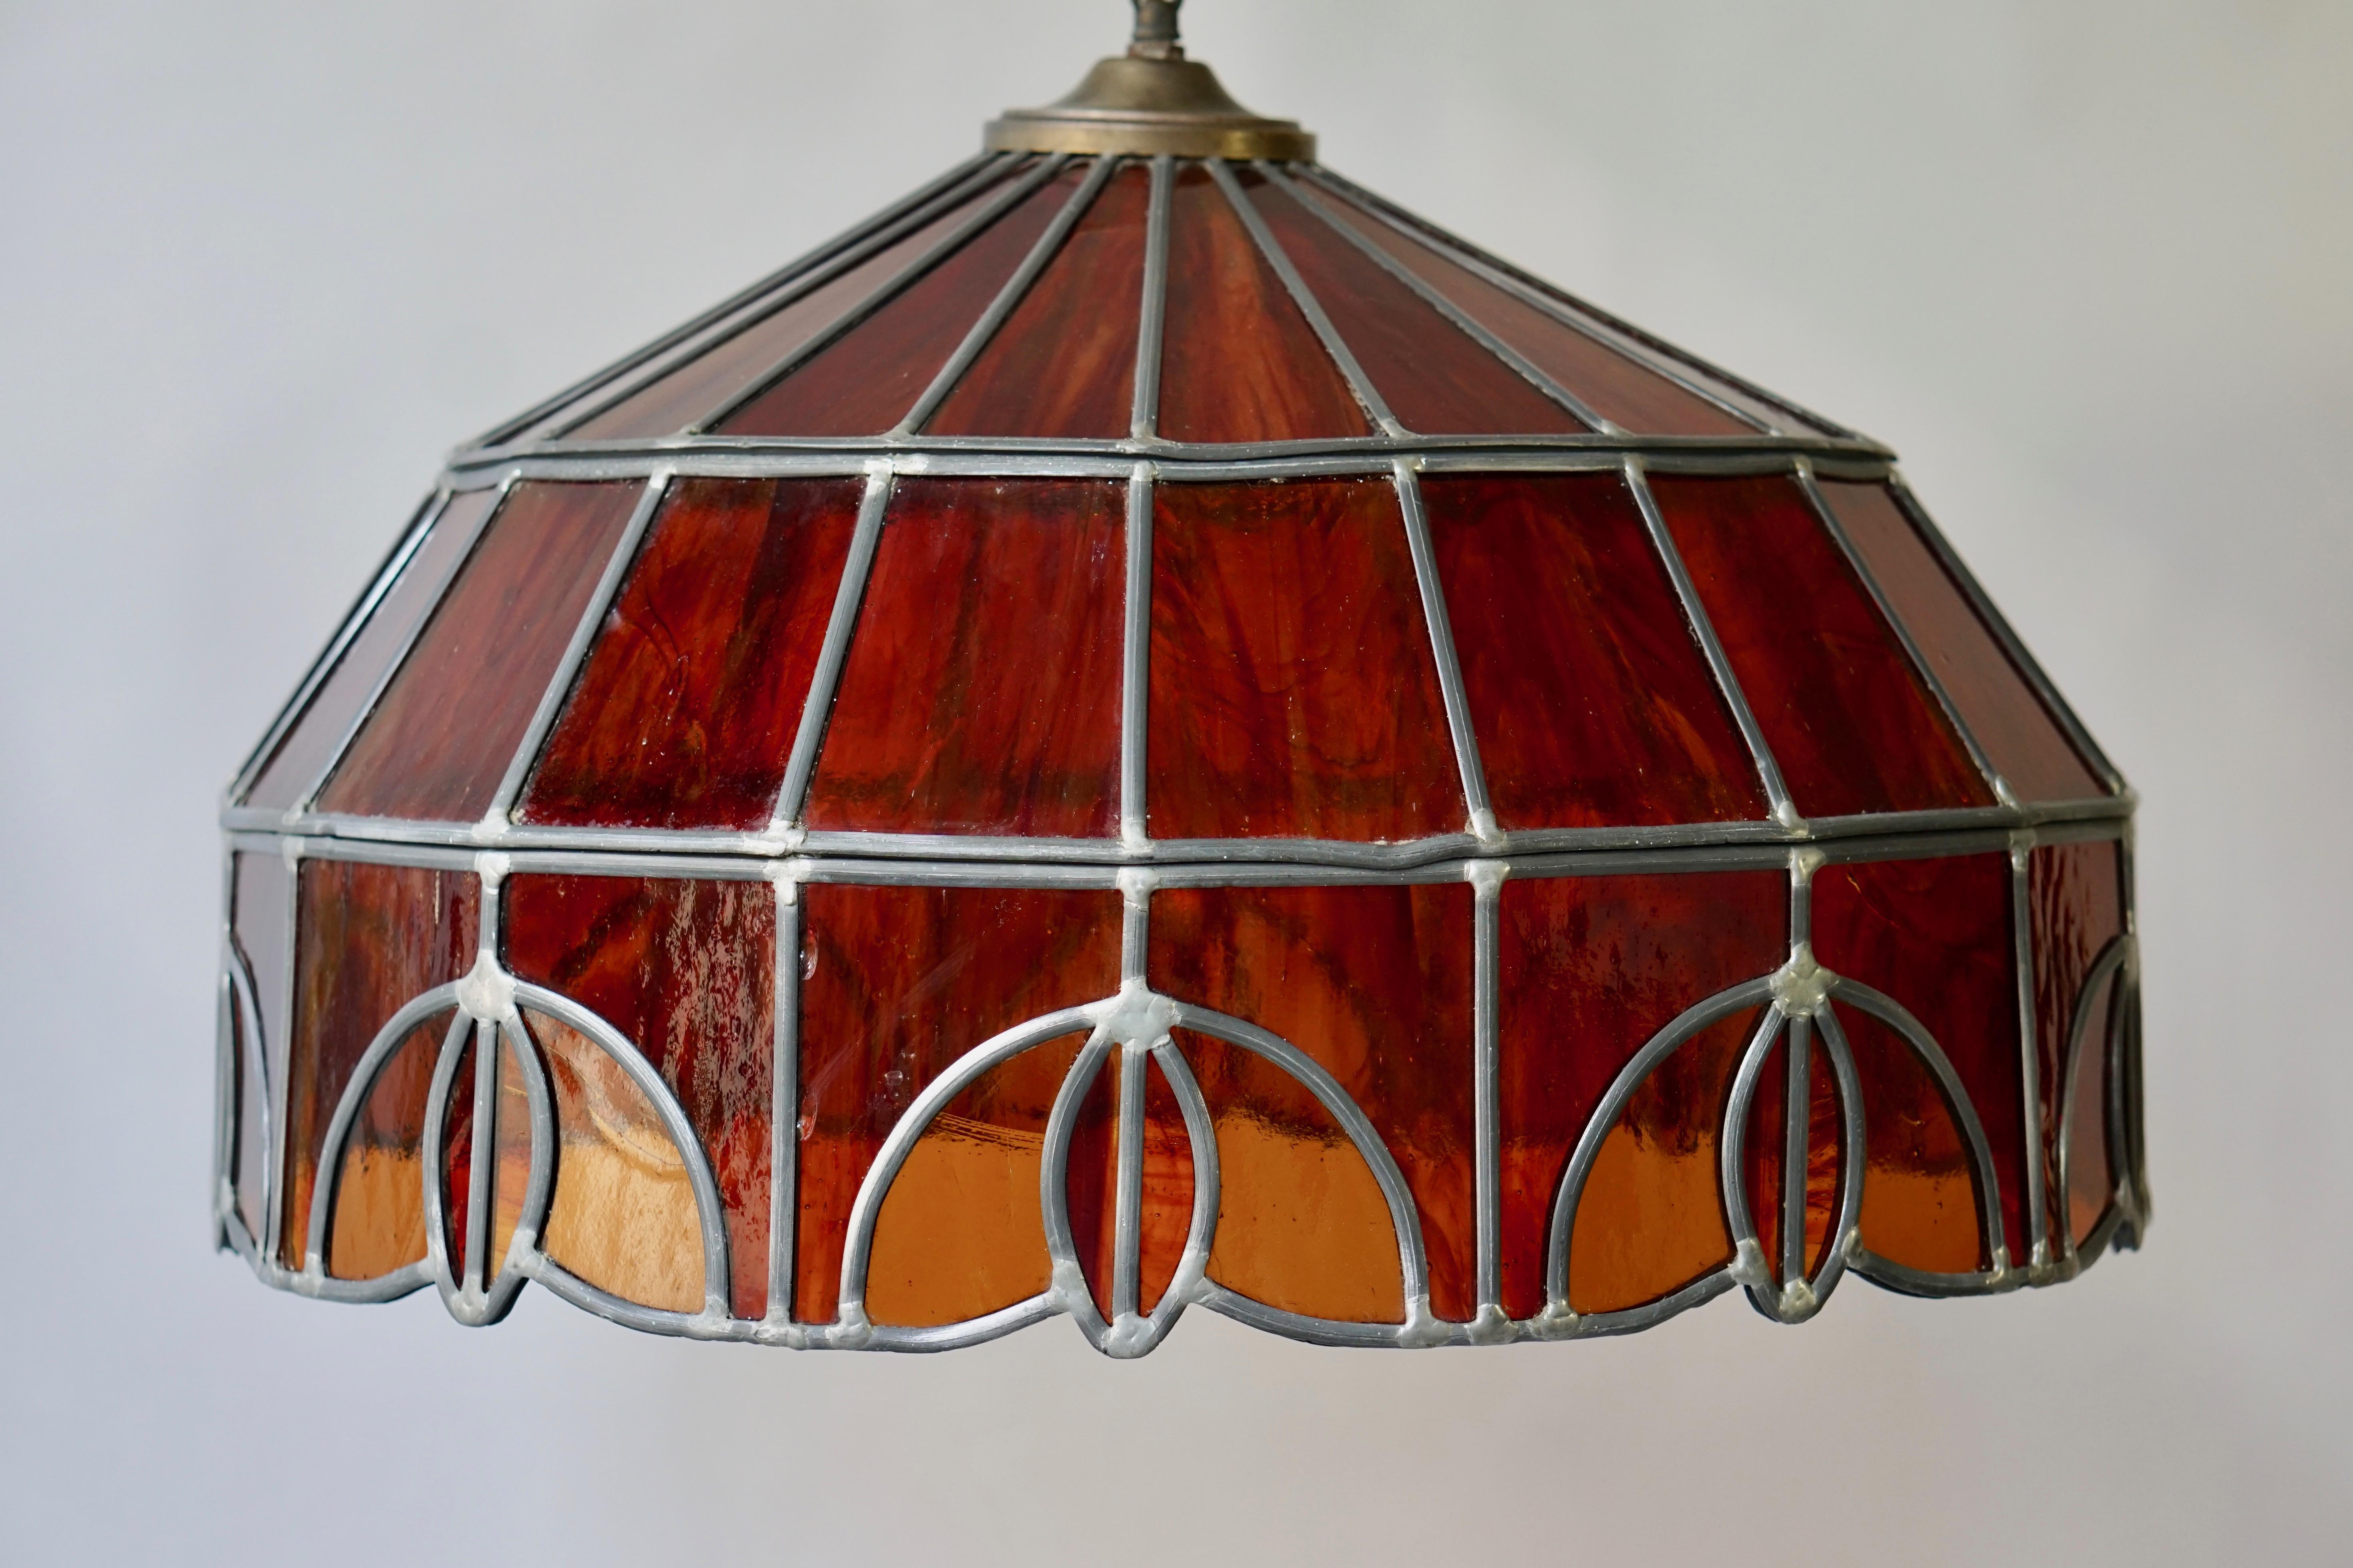 Stained glass pendant light.
Measures: Diameter 50 cm.
Height fixture 30 cm.
Total height 115 cm.